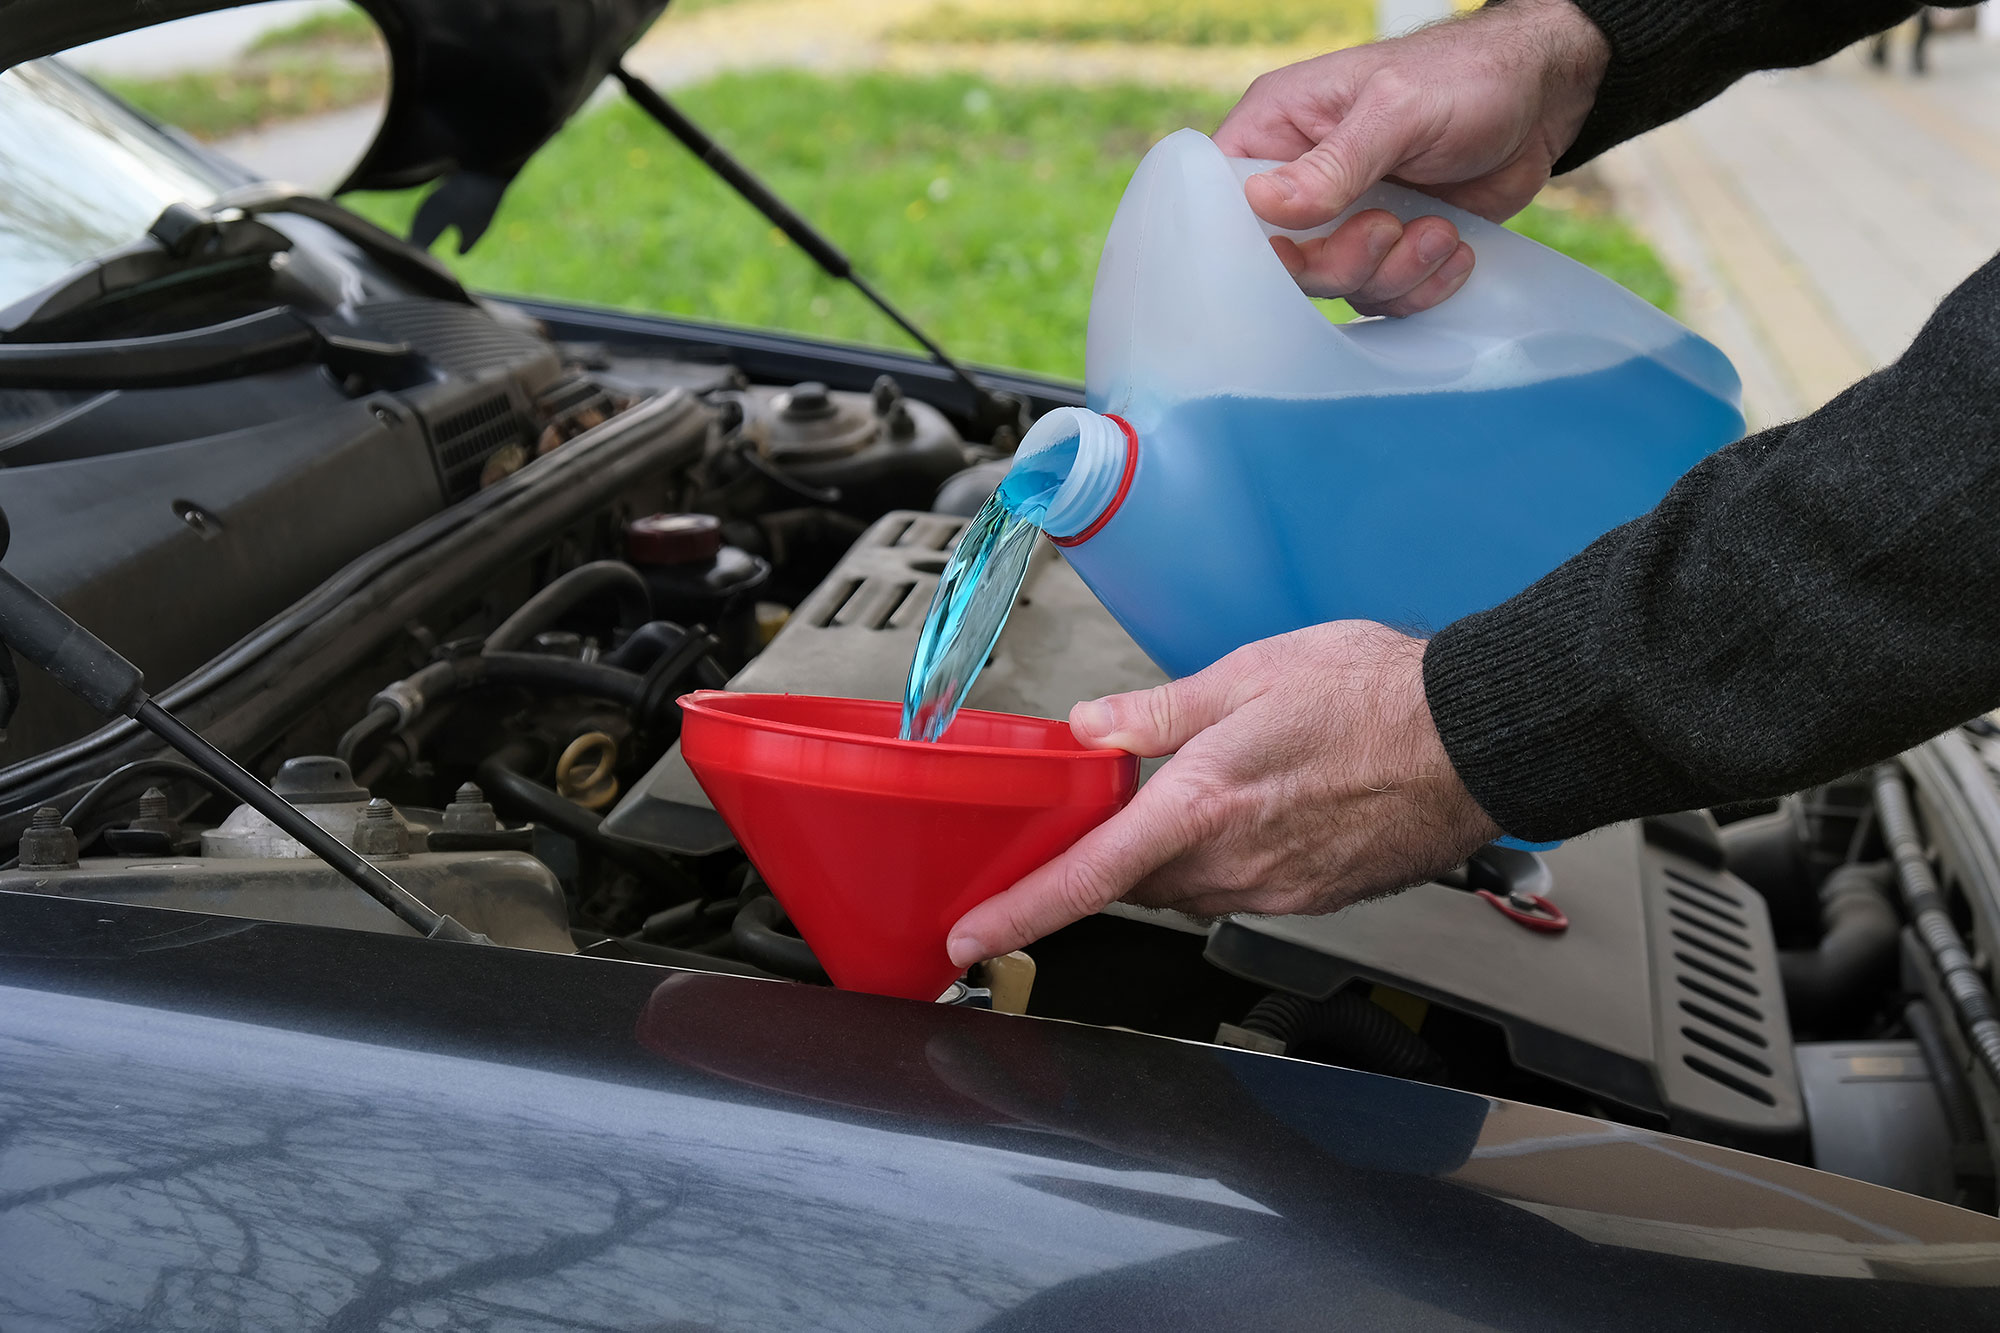 How Often Should You Refill the Windshield Washer Fluid in a Car?